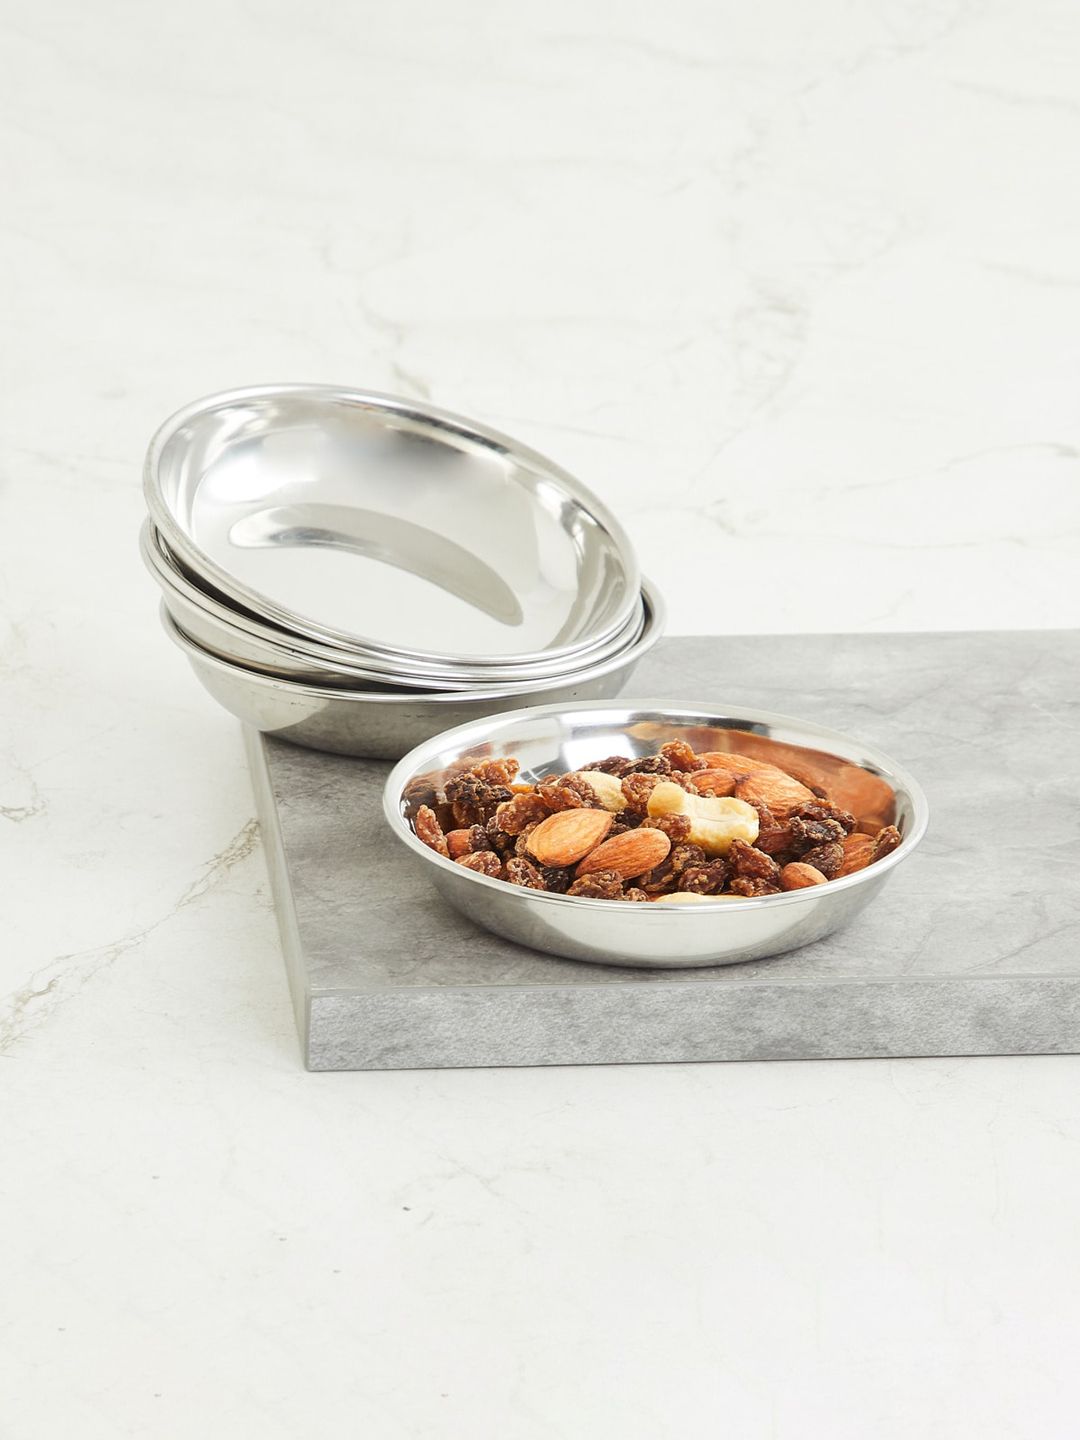 Home Centre Set Of 6 Silver-Toned Solid Stainless Steel Halwa Plate Price in India